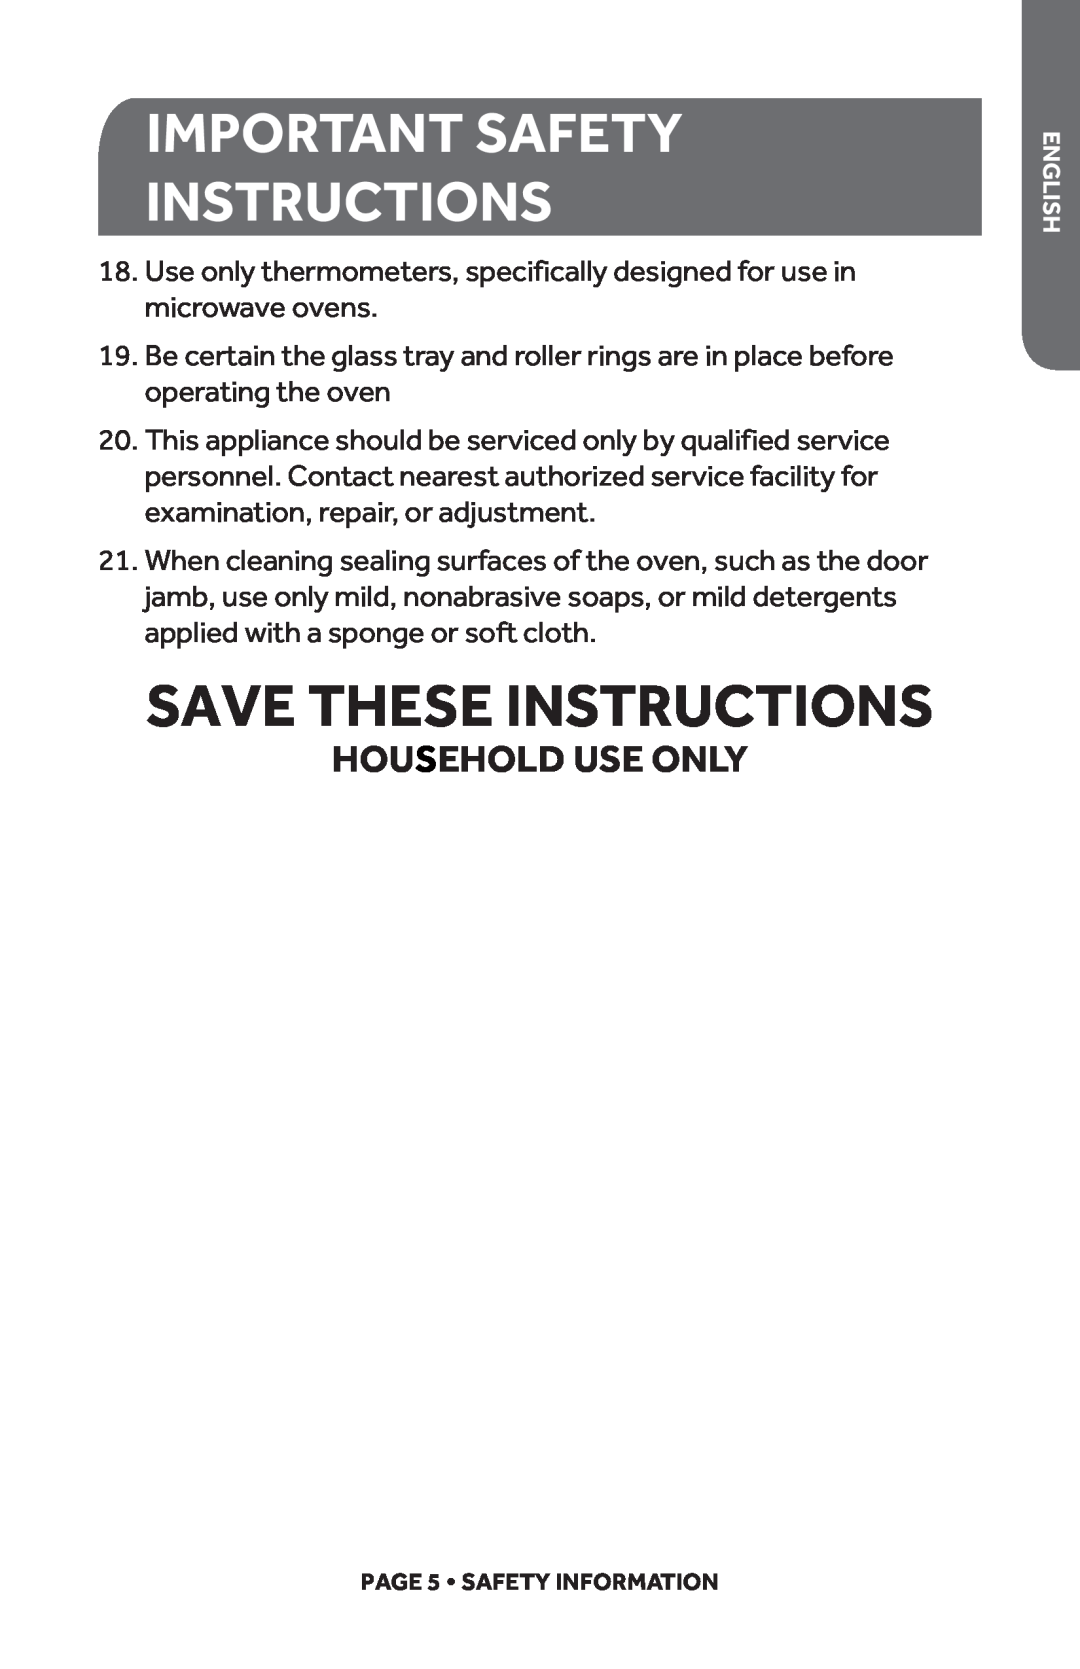 Haier HMC610BEBB, HMC610BEWW user manual Save These Instructions, Household Use Only, Important Safety Instructions 